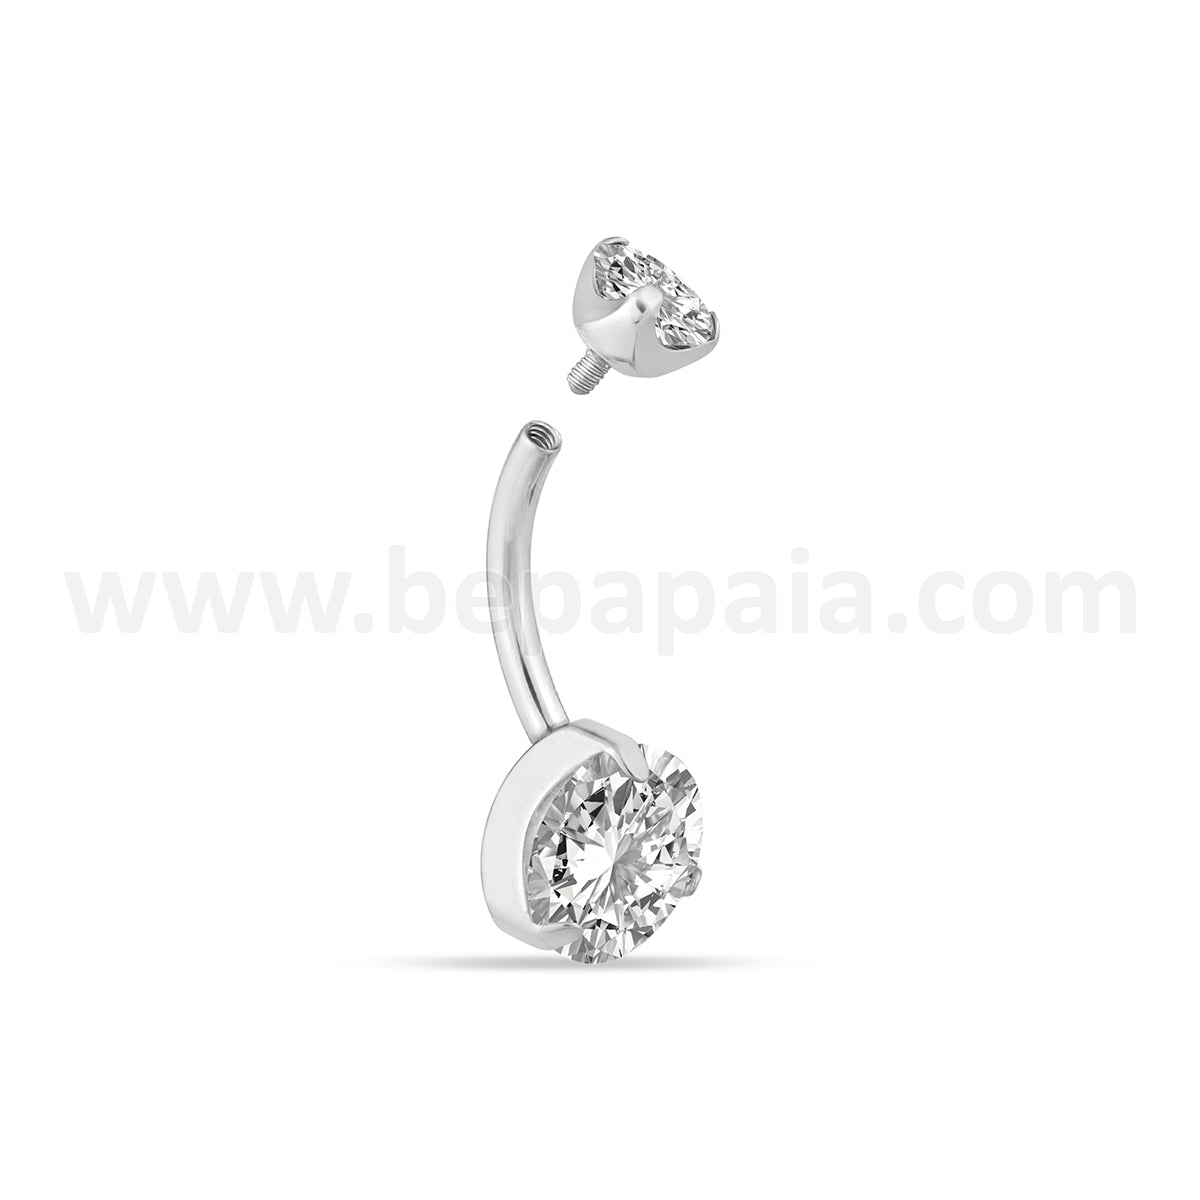 Titanium belly button piercing with double-set zirconia